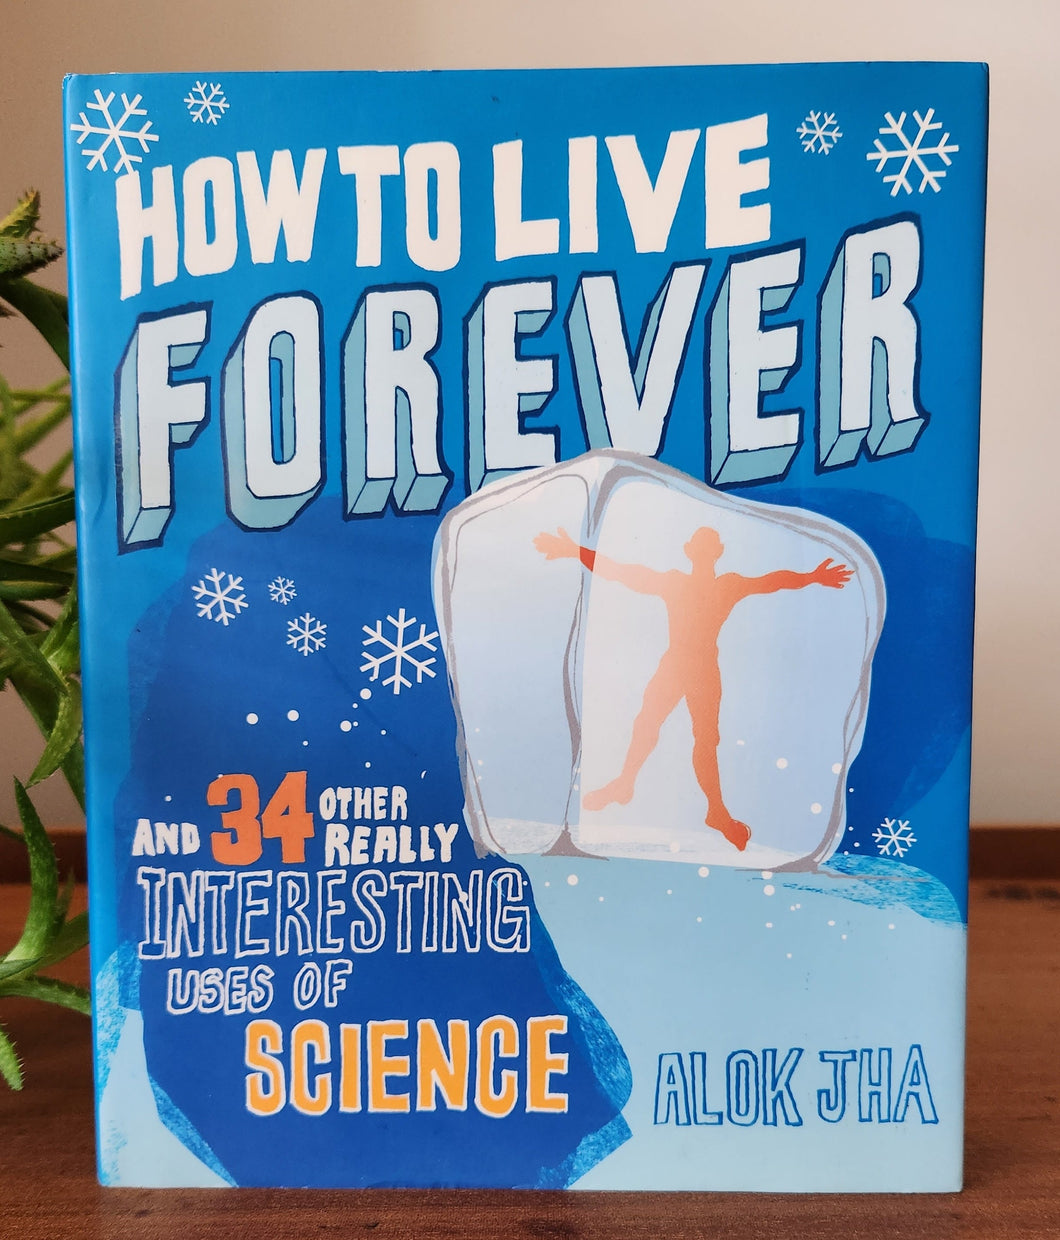 How to Live Forever: And 34 Other Really Interesting Uses of Science by Alok Jha